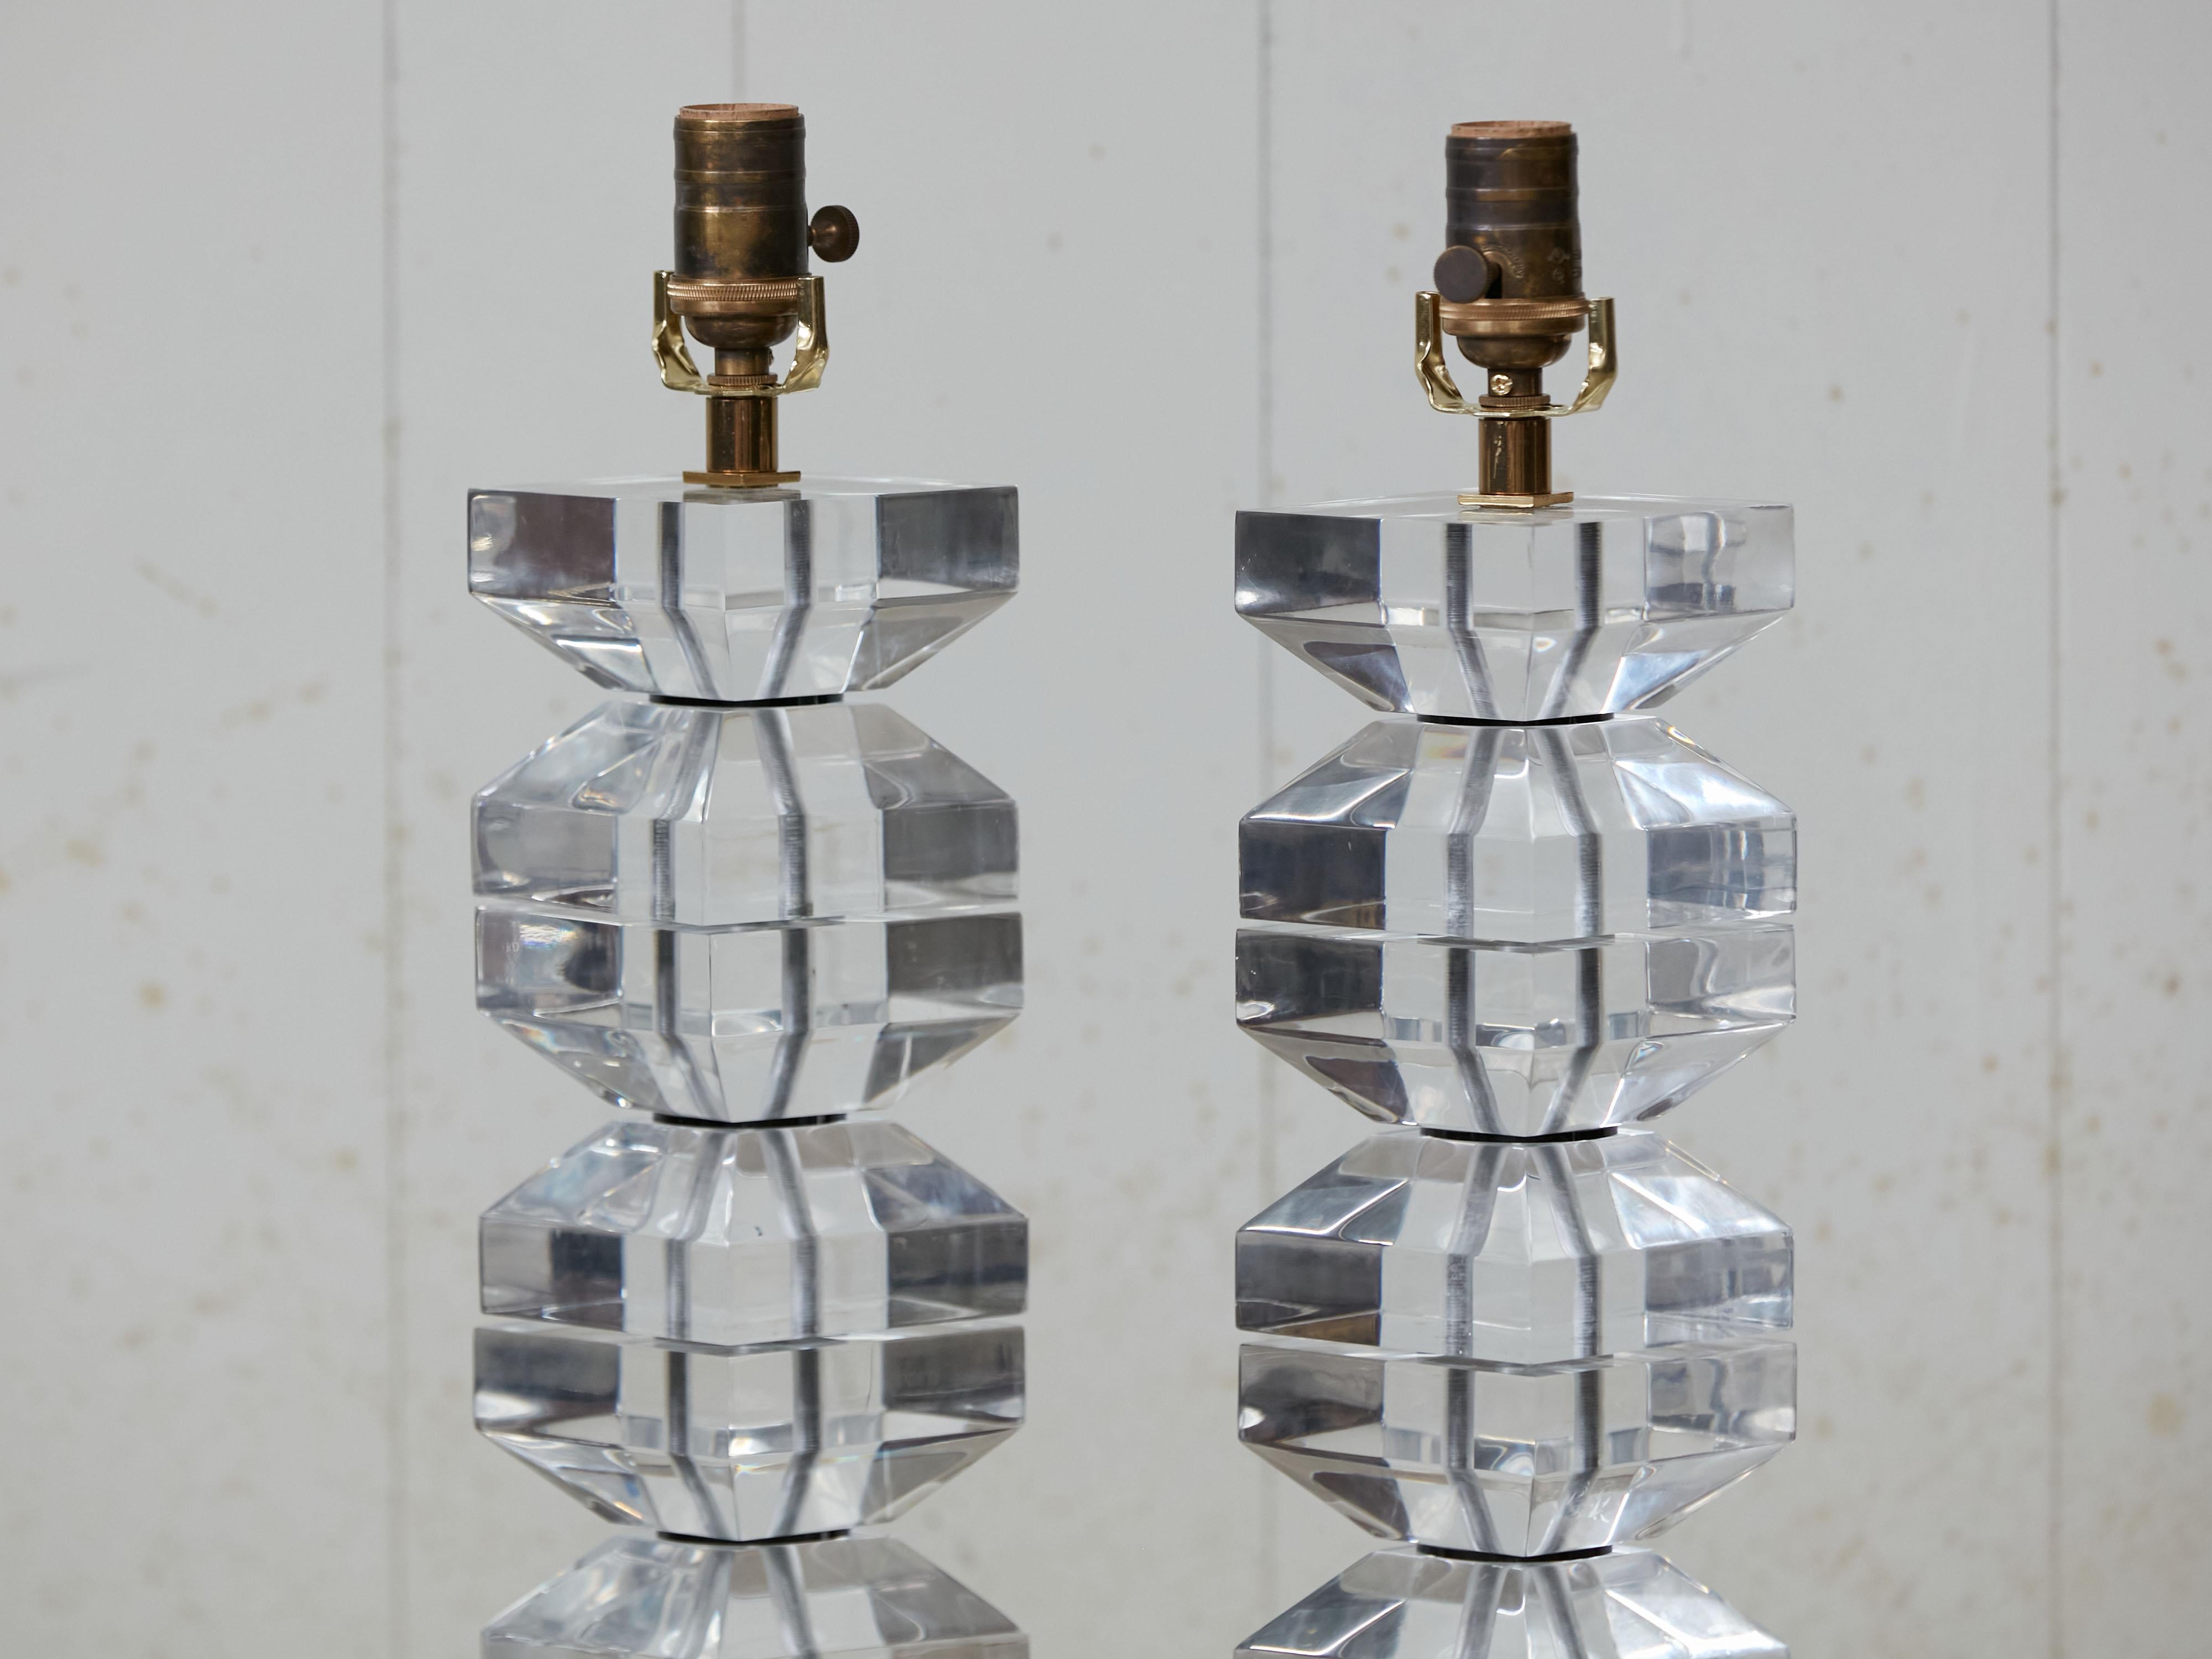 Pair of Midcentury Lucite Table Lamps with Chamfered Cubes, Rewired for the US 12